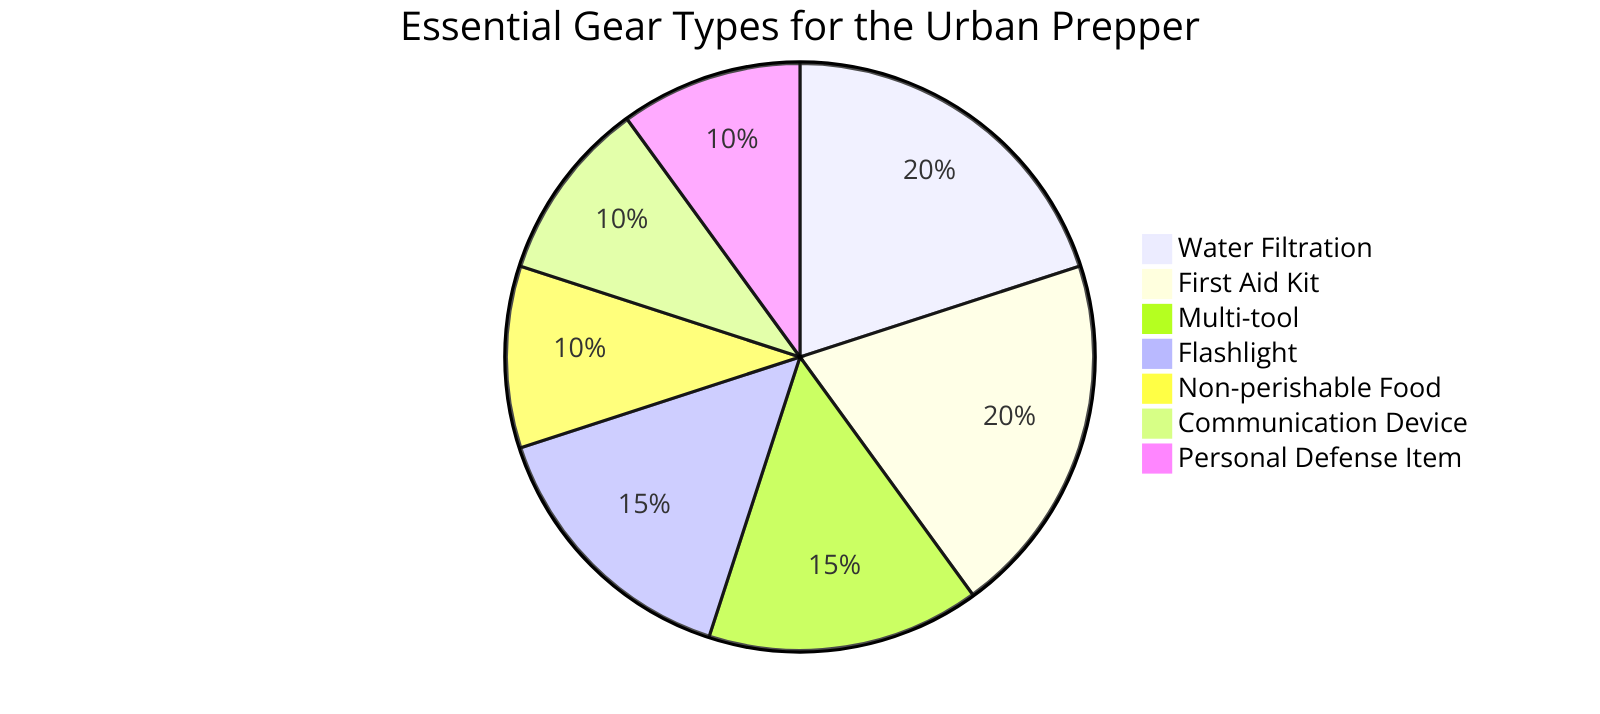 the percentage distribution of essential gear types for the urban prepper